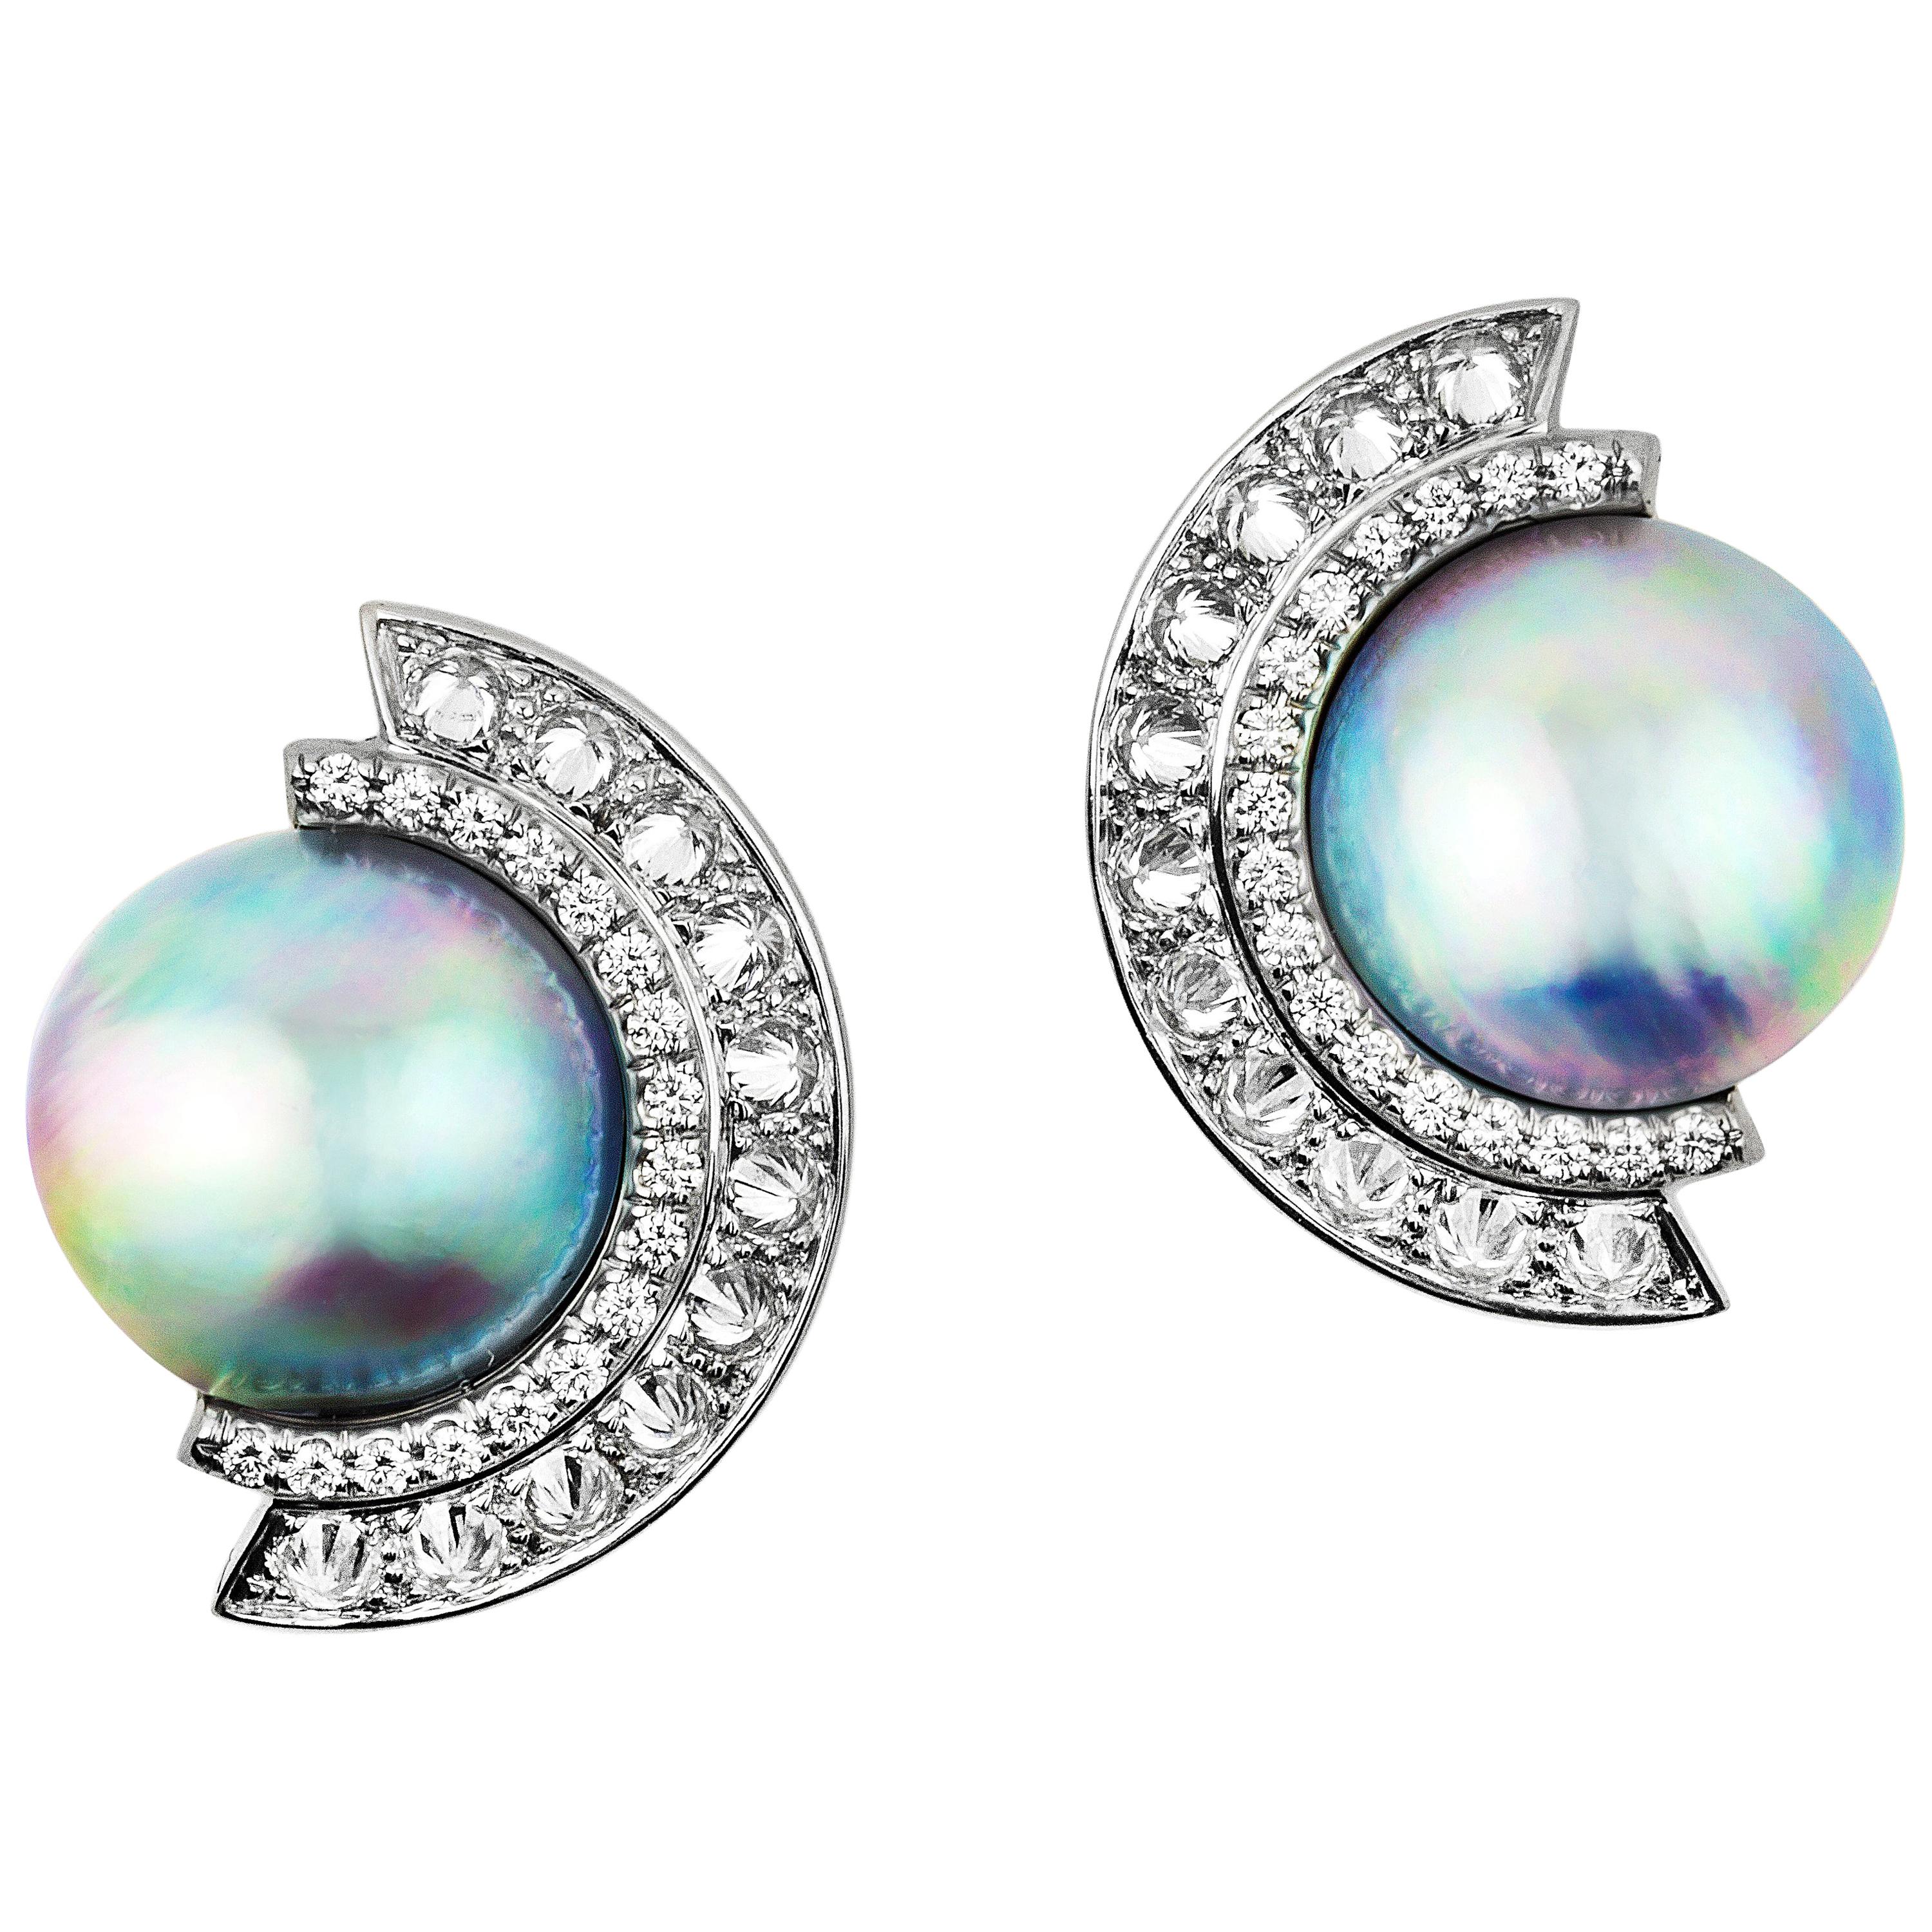 AnaKatarina Sea of Cortez Peacock Pearl, Diamond, and White Gold Earrings For Sale